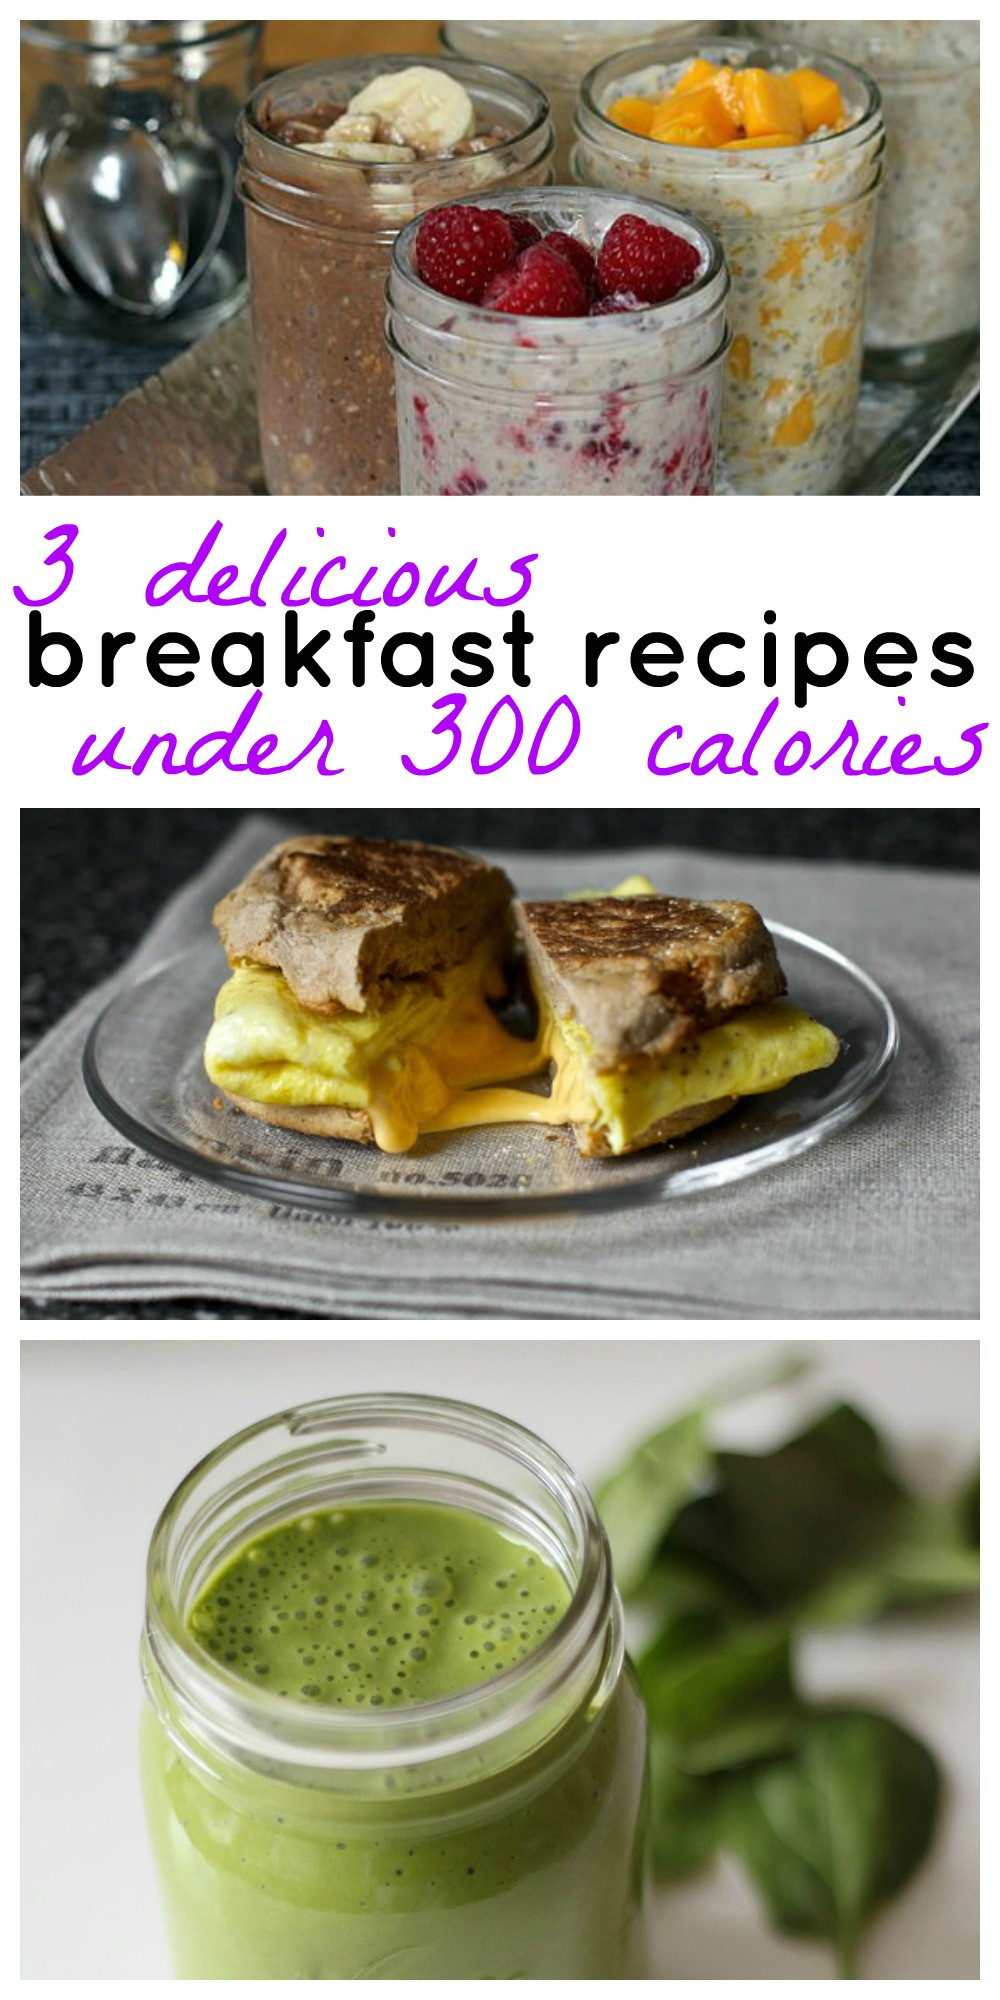 Low Calorie Breakfast Recipes
 delicious low calorie breakfast recipes